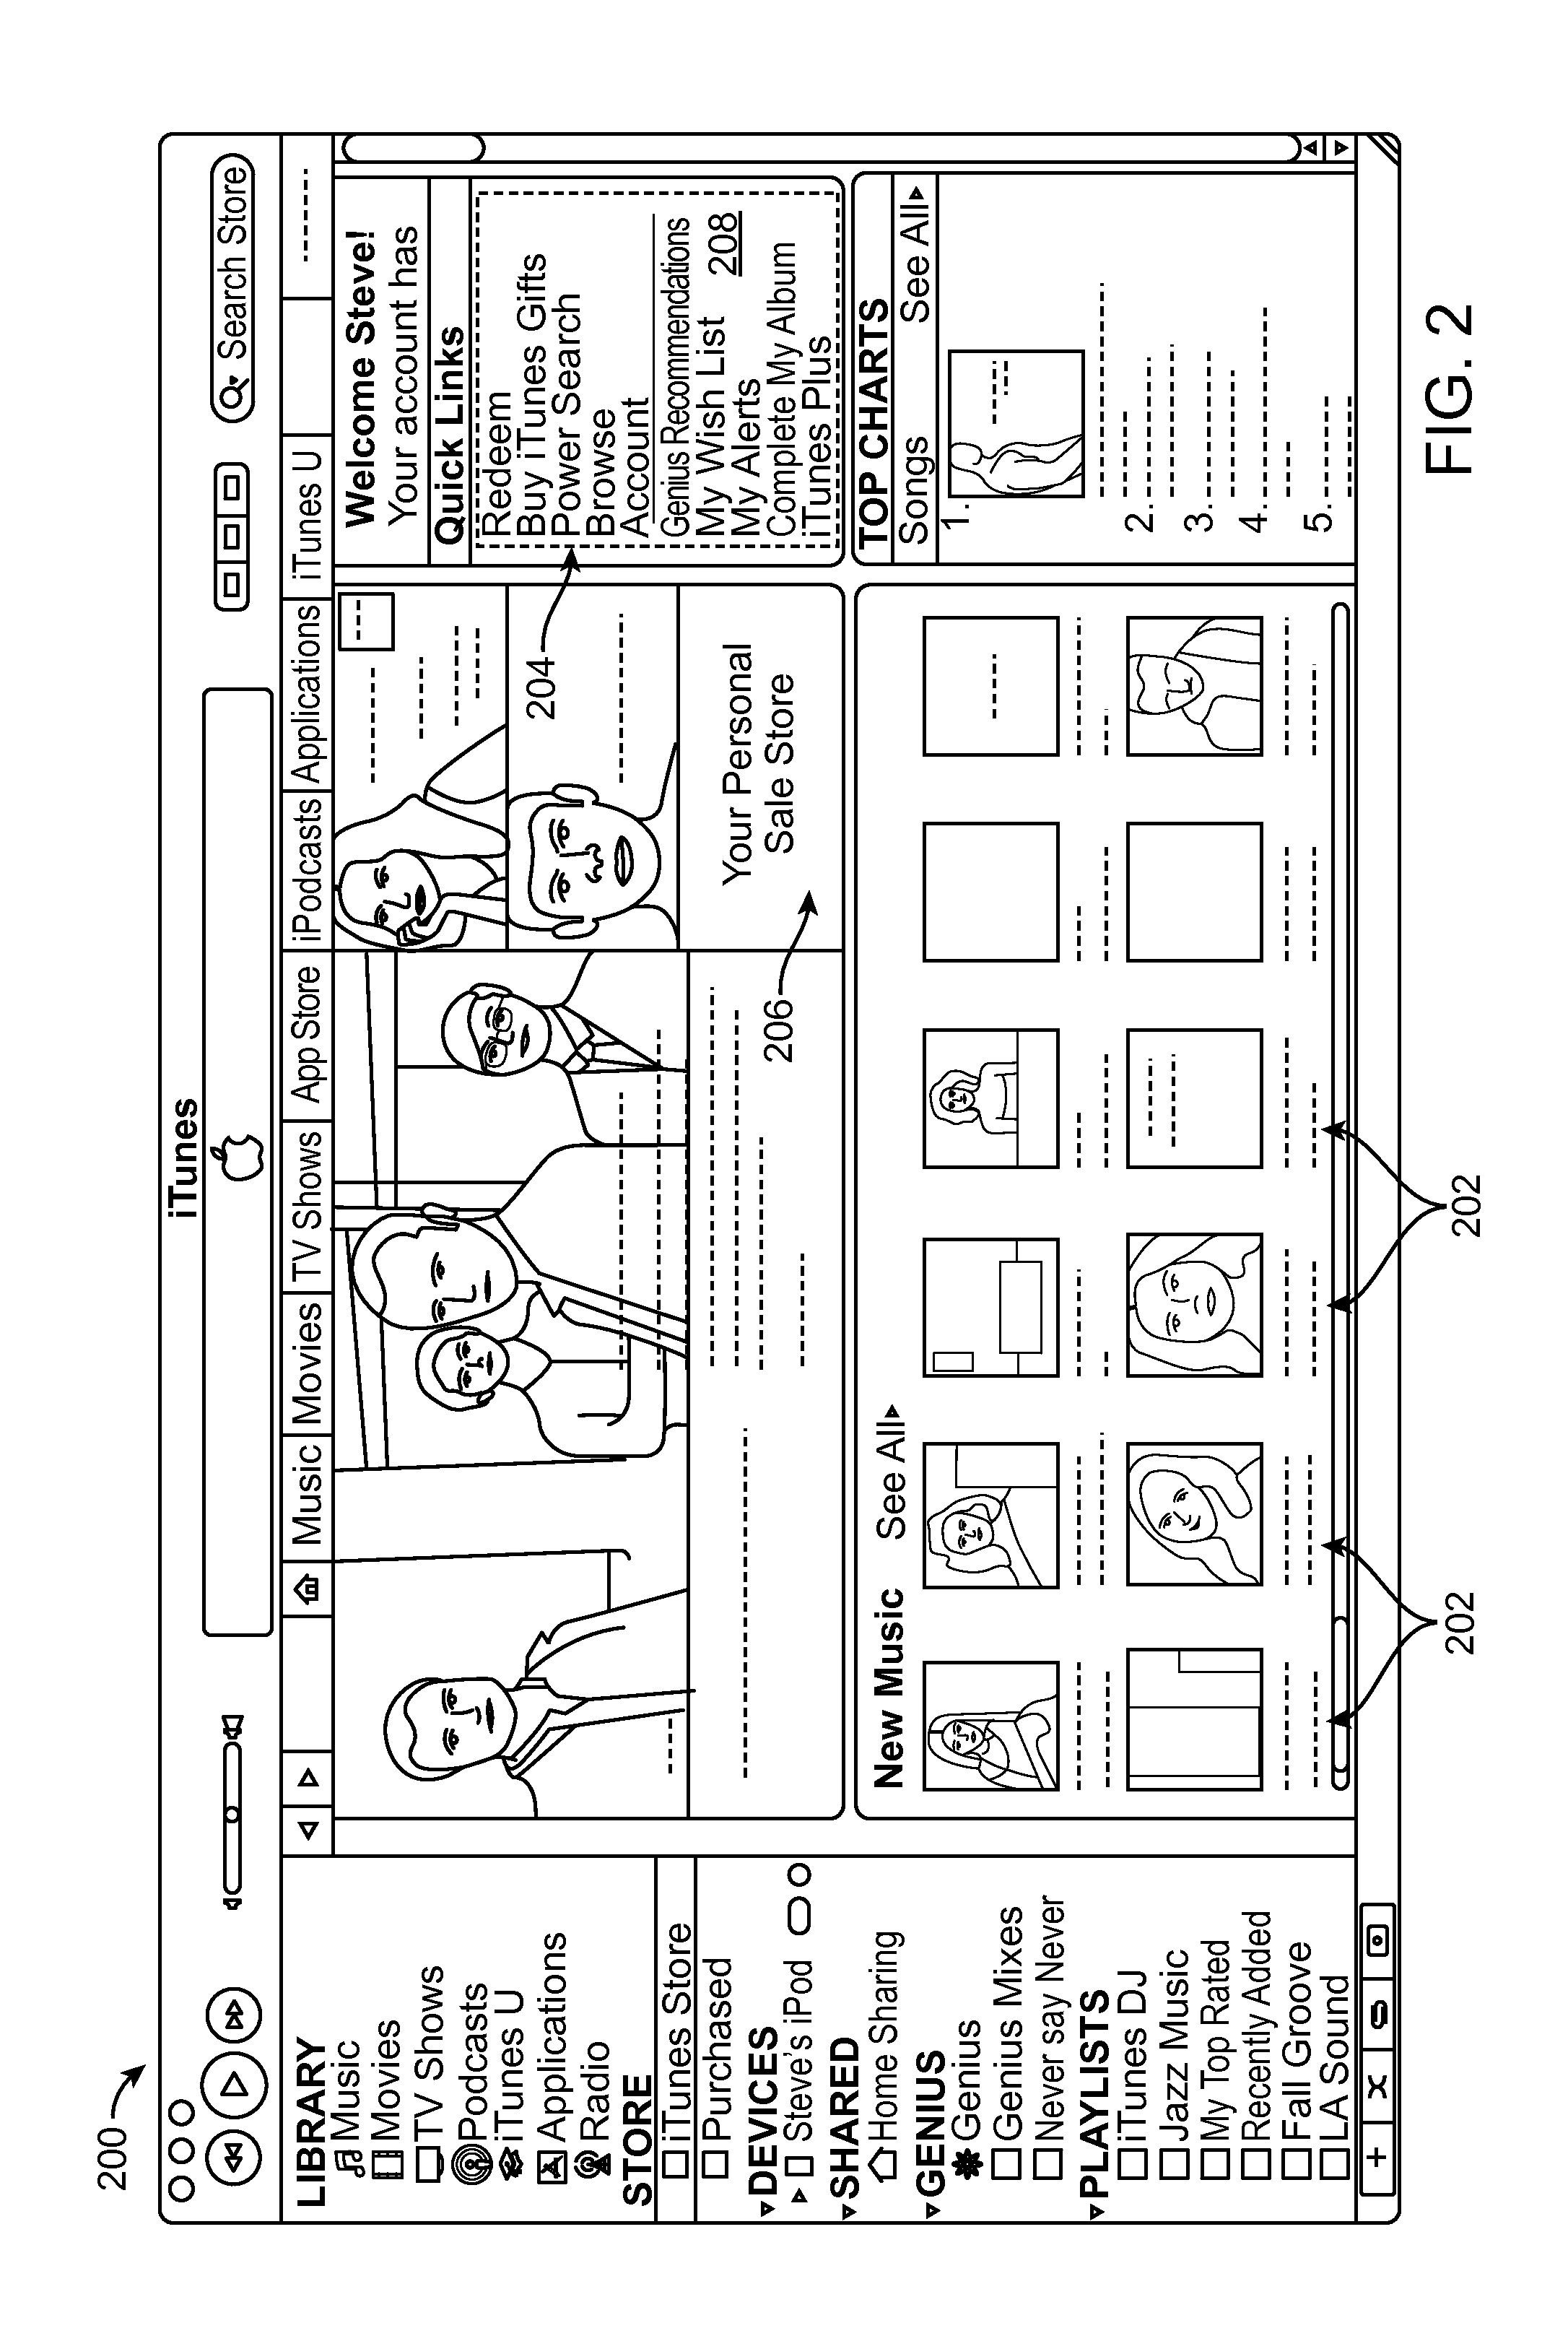 System and method for assembling personalized offers